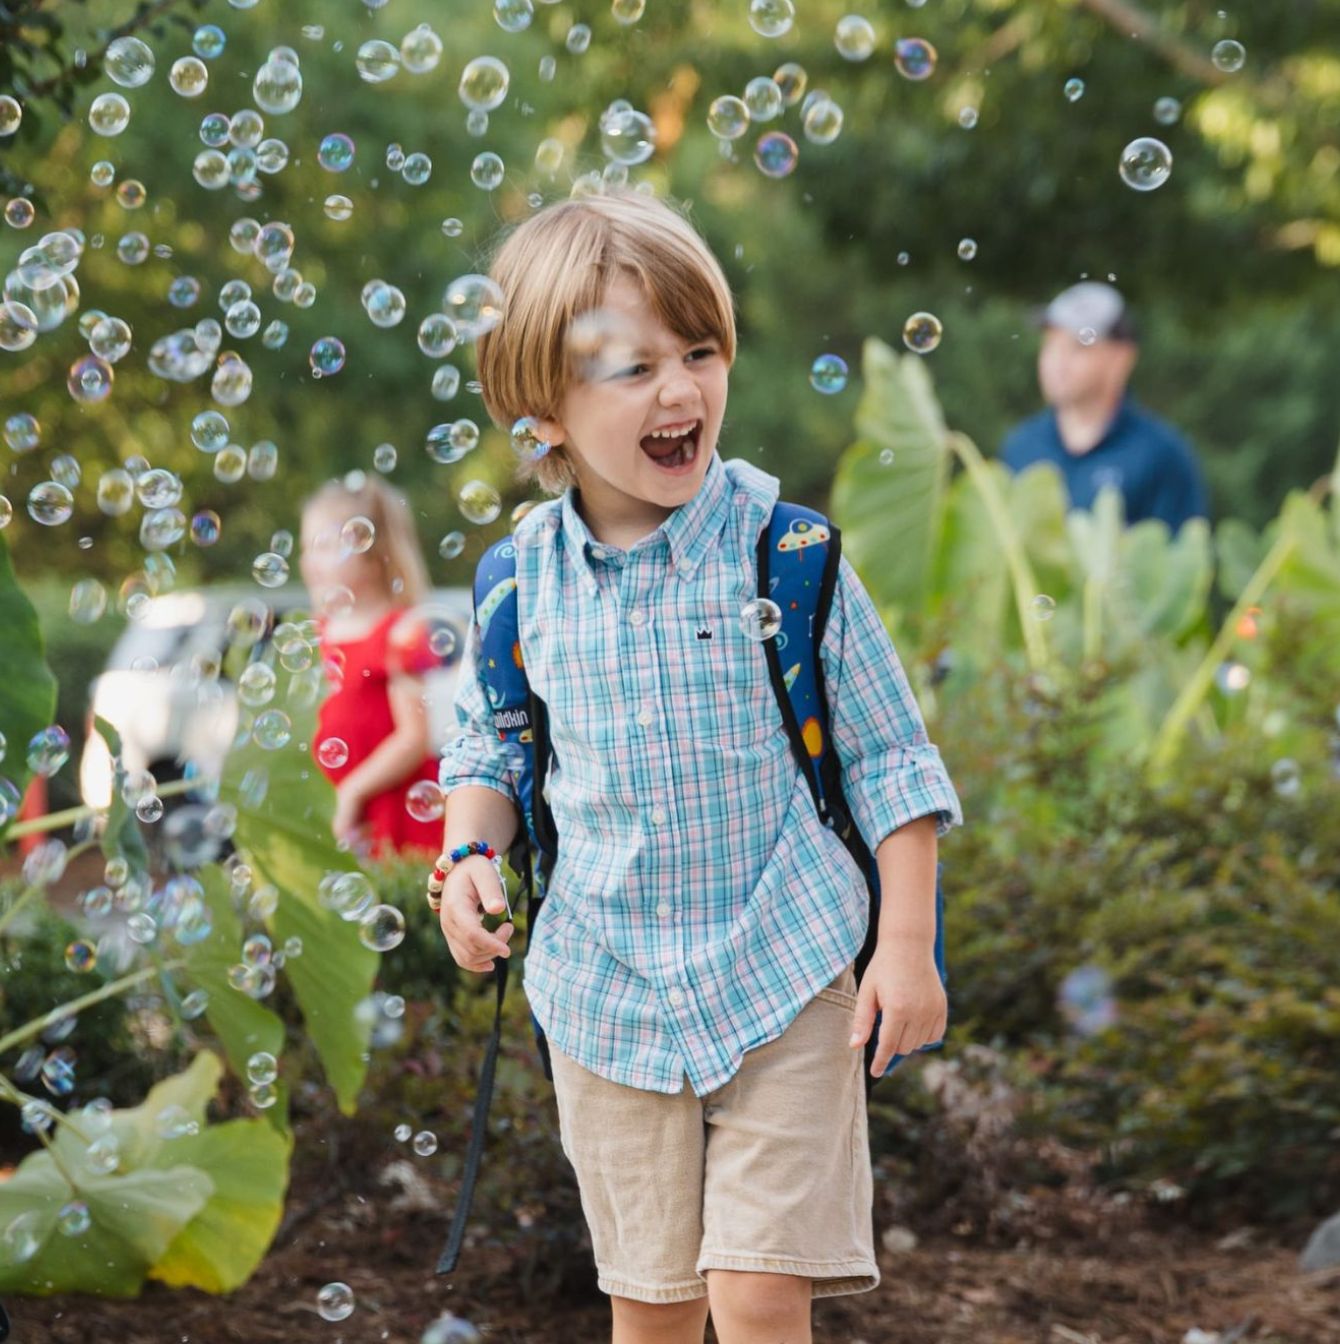 A young boy with a backpack, laughing joyously amidst floating soap bubbles with blurred figures in the background.